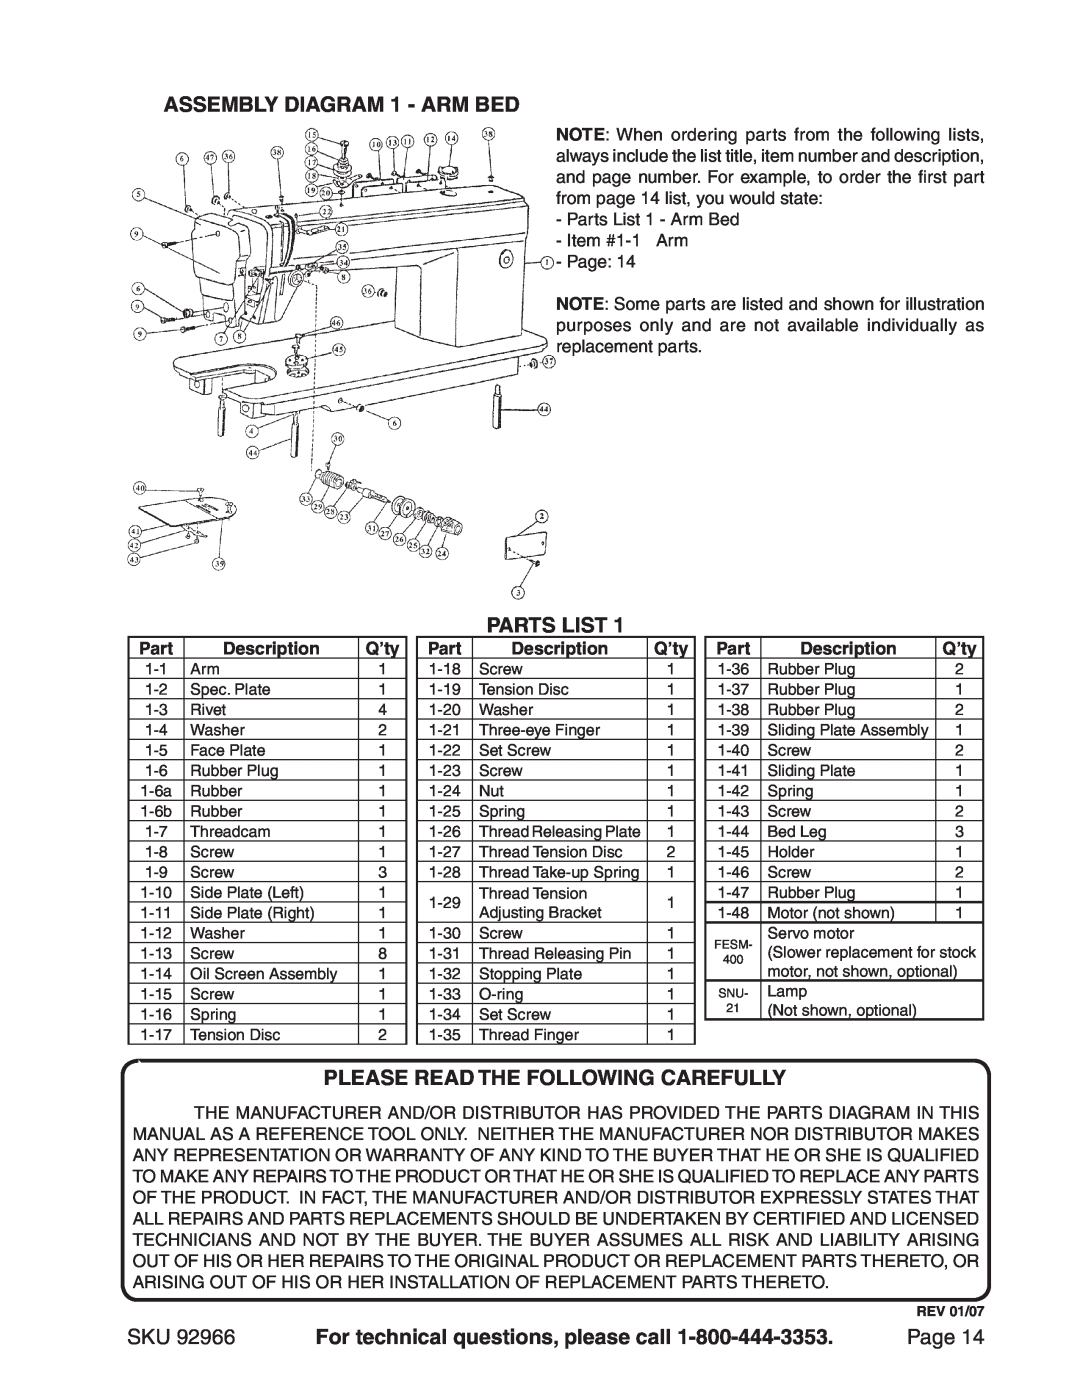 Harbor Freight Tools 92966 manual ASSEMBLY Diagram 1 - ARM BED, Parts List, Please Read The Following Carefully, Page, Q’ty 